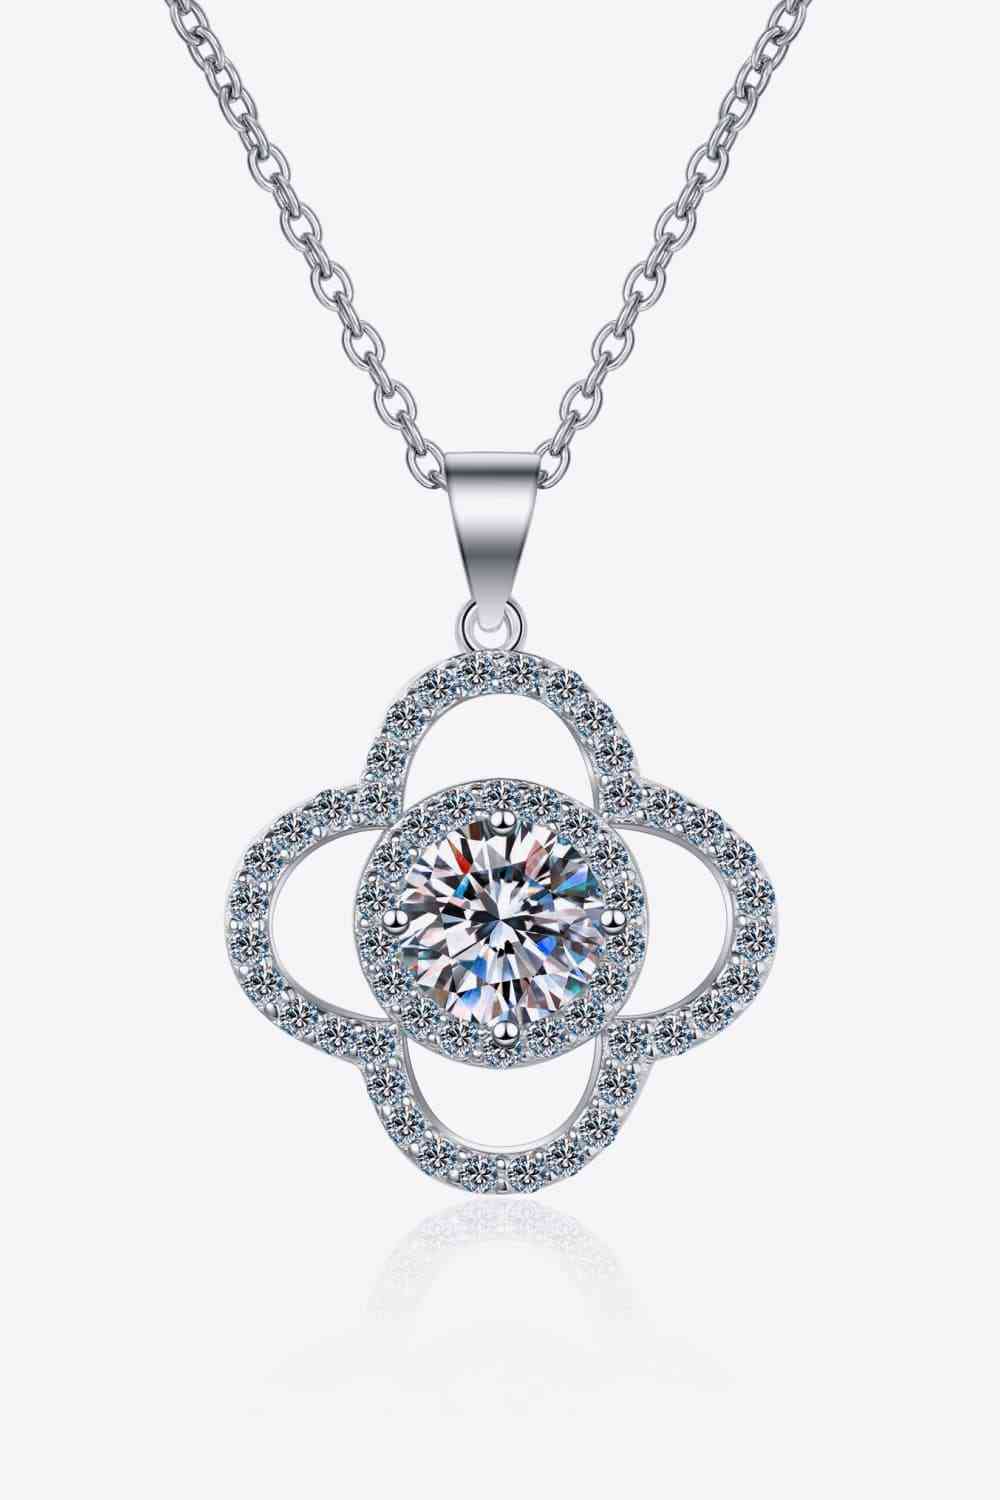 1 Carat Moissanite 925 Sterling Silver Necklace - AllIn Computer